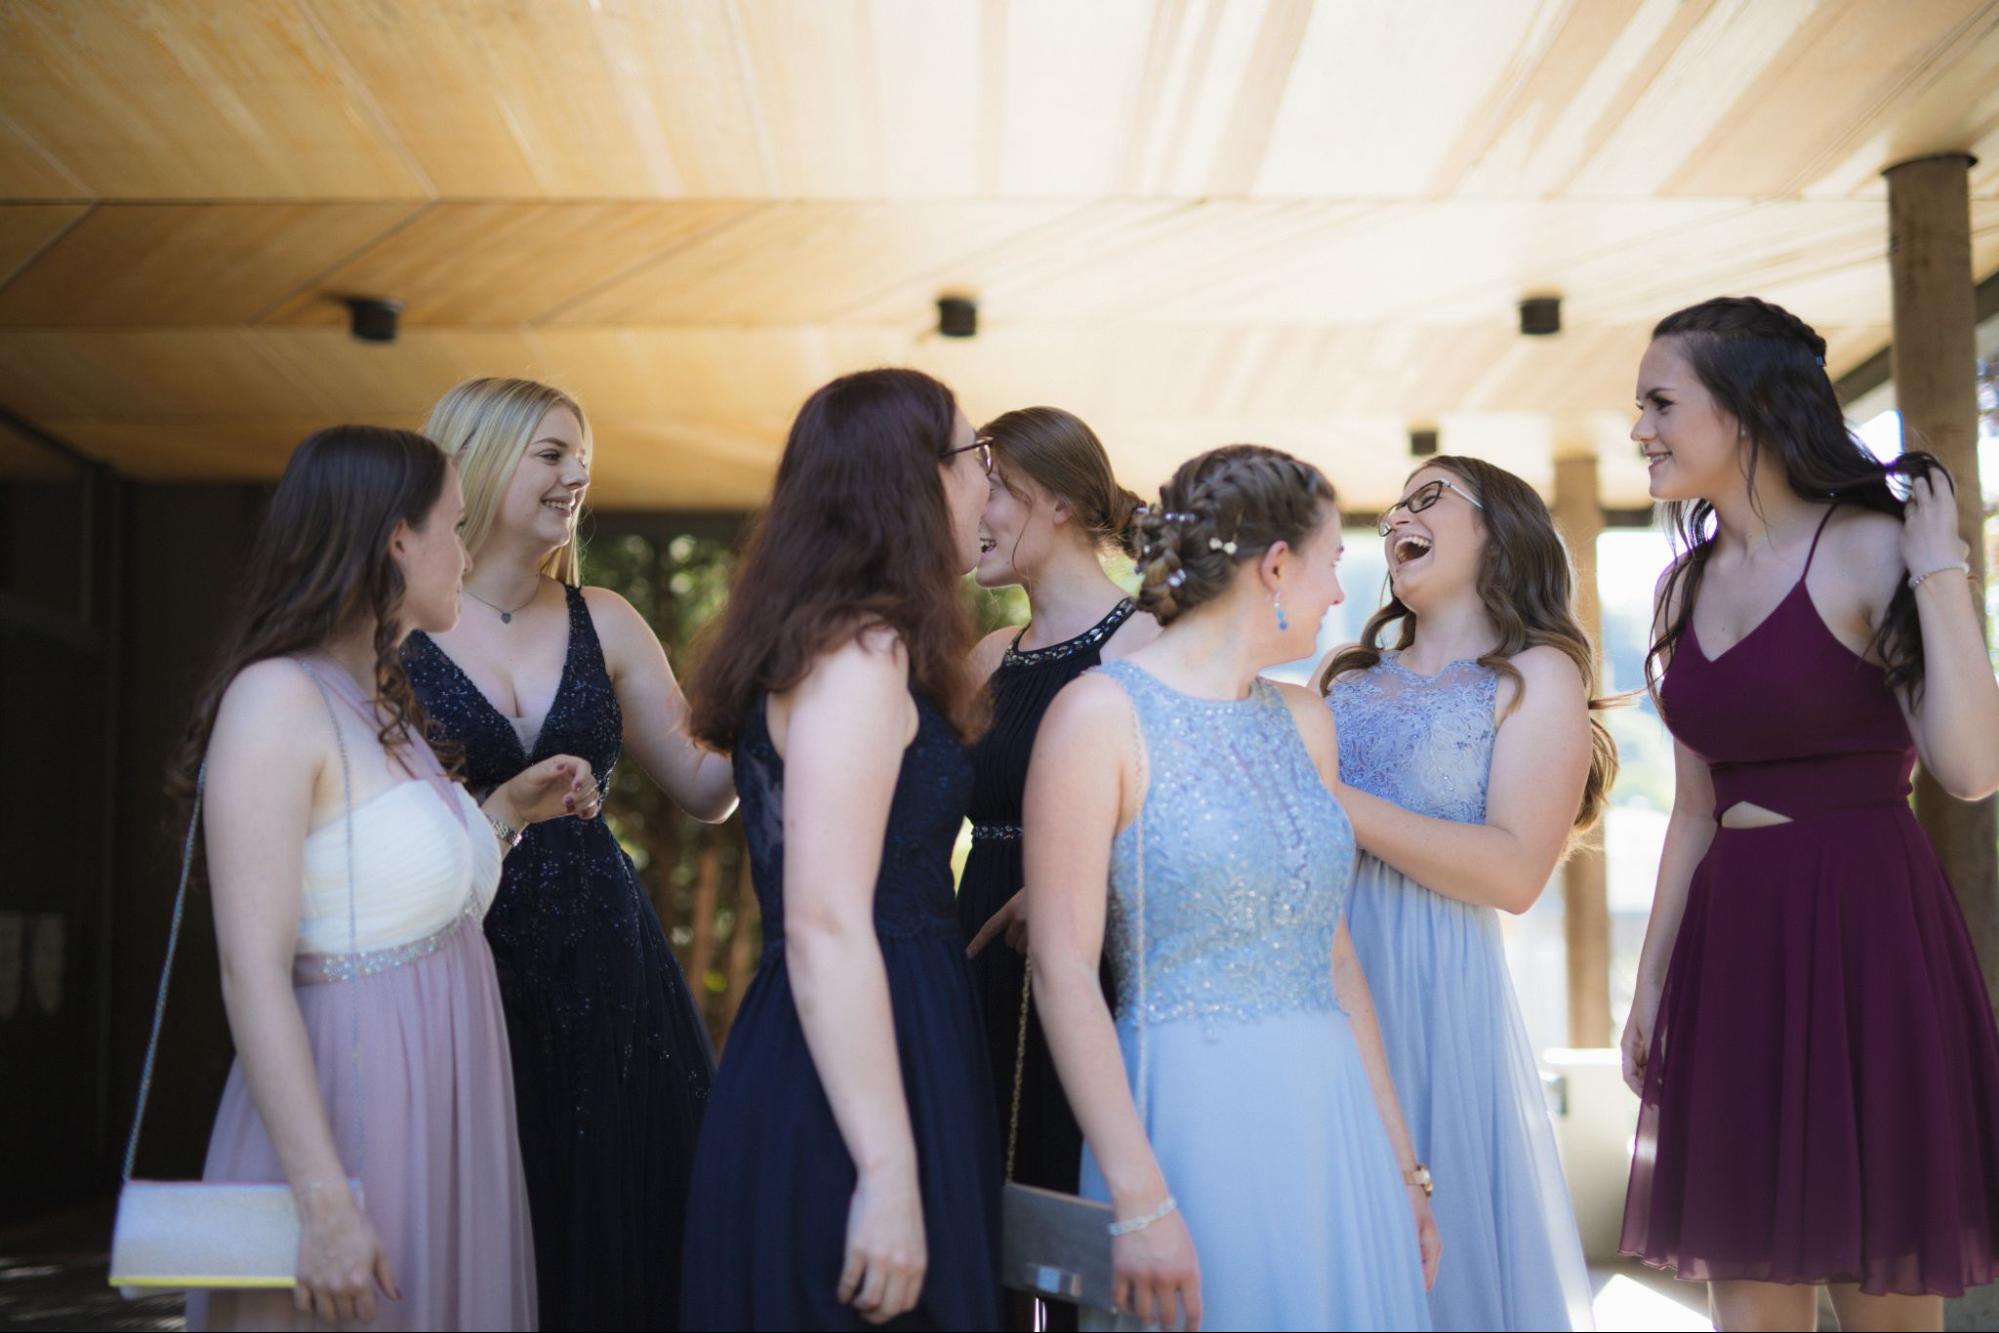 In comparison to prom, homecoming is a semi-formal dance, meaning you can feel free to wear a shorter or more casual dress, romper, or even a jumpsuit